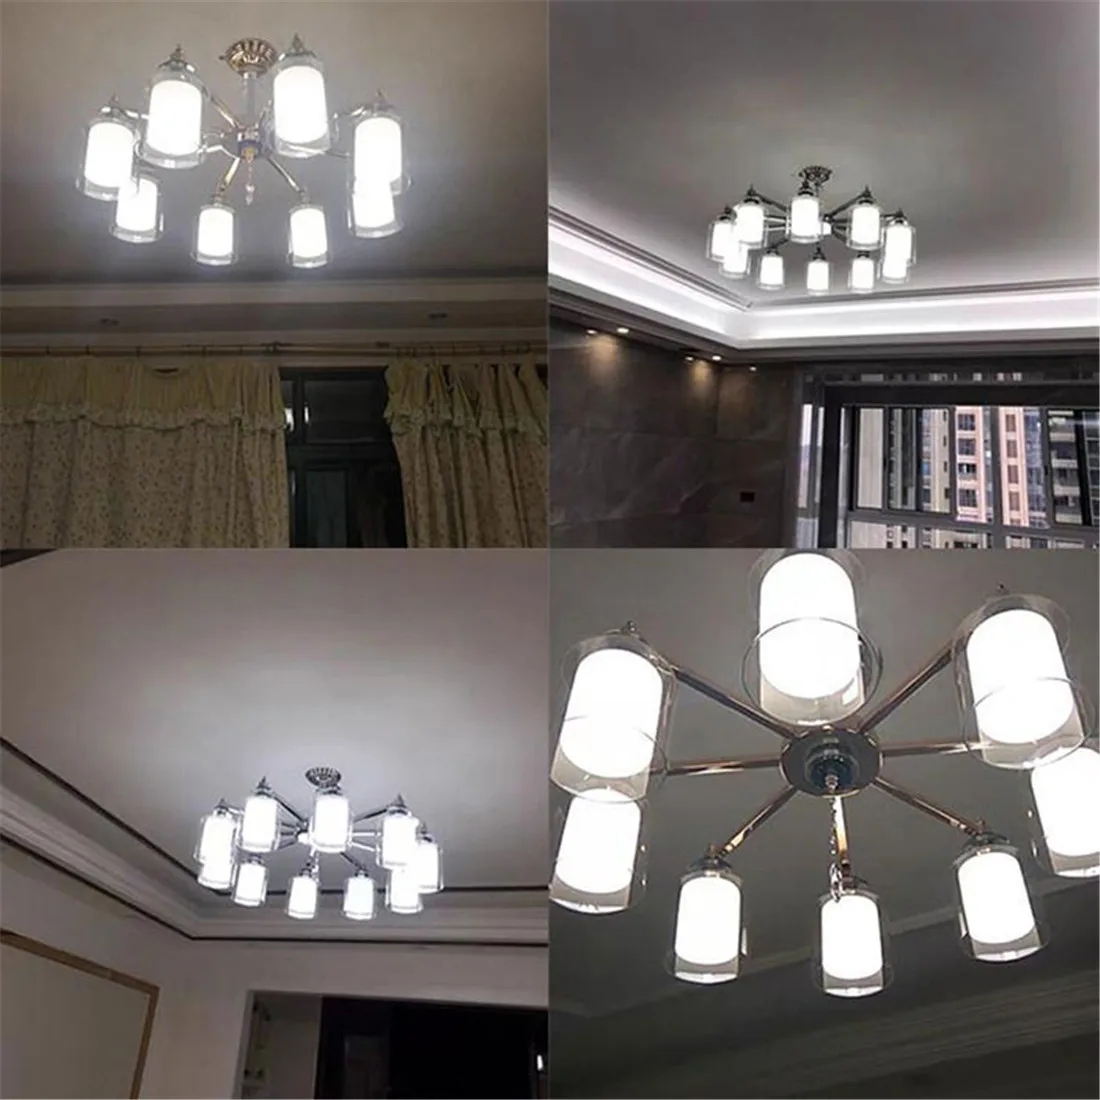 

Clear White Cylinder Glass Lamp Shade Replacements for Lighting Fixtures, Frosted Glass Lampshade for E27 Wall Sonces Chandelier